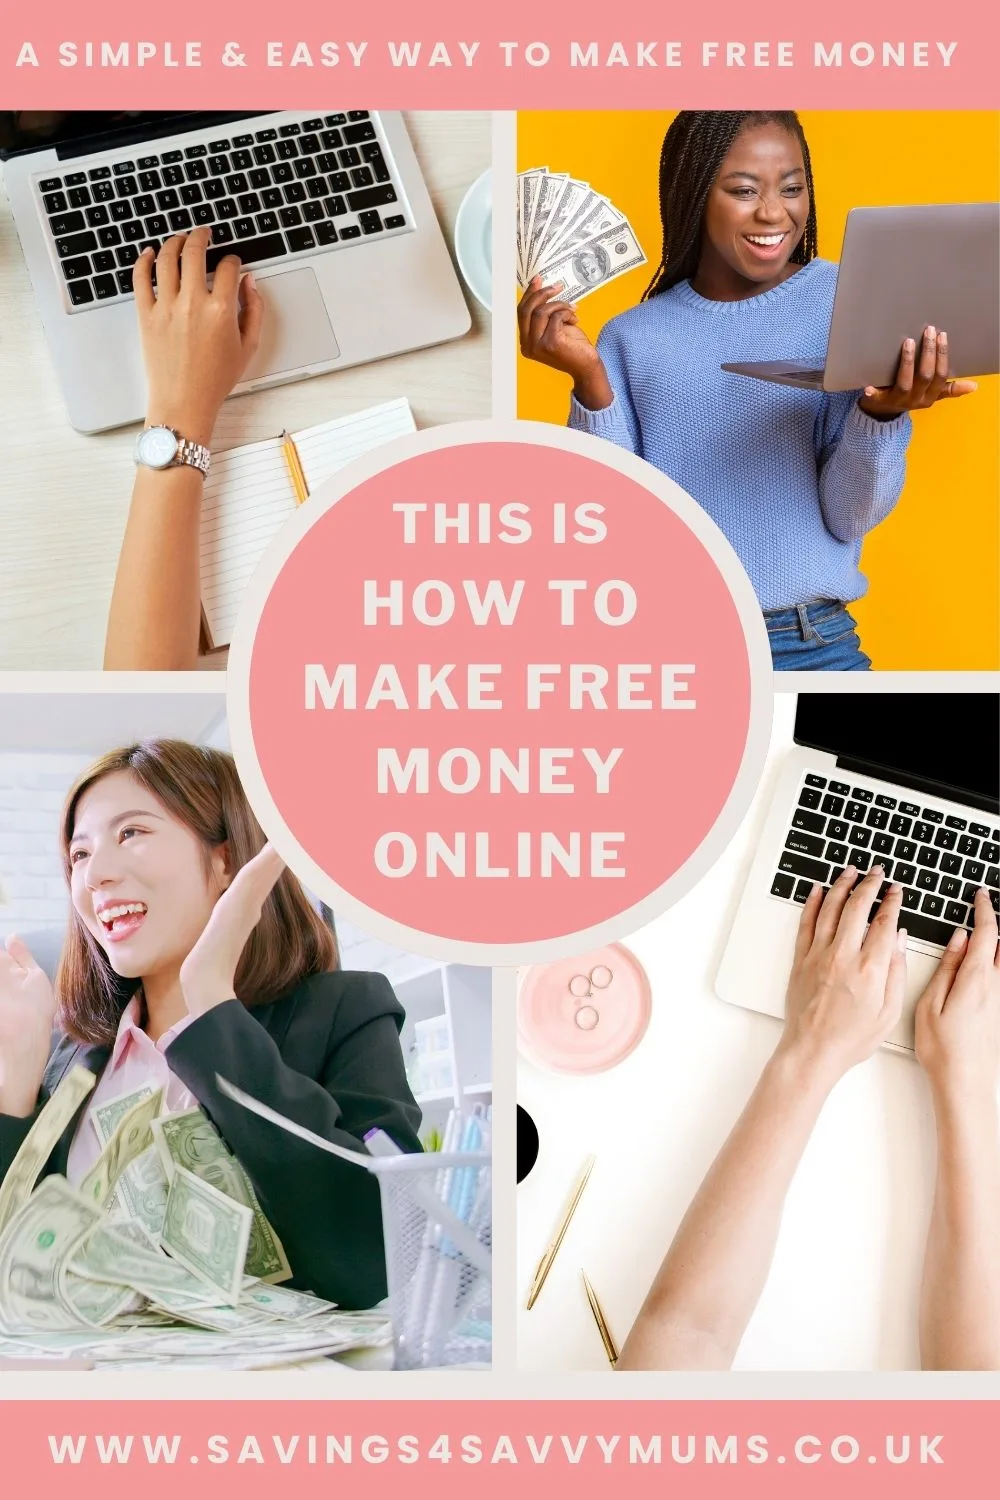 This is how to get free money in the UK. We have included everything that we use to make extra money every month from home by Laura at Savings 4 Savvy Mums 